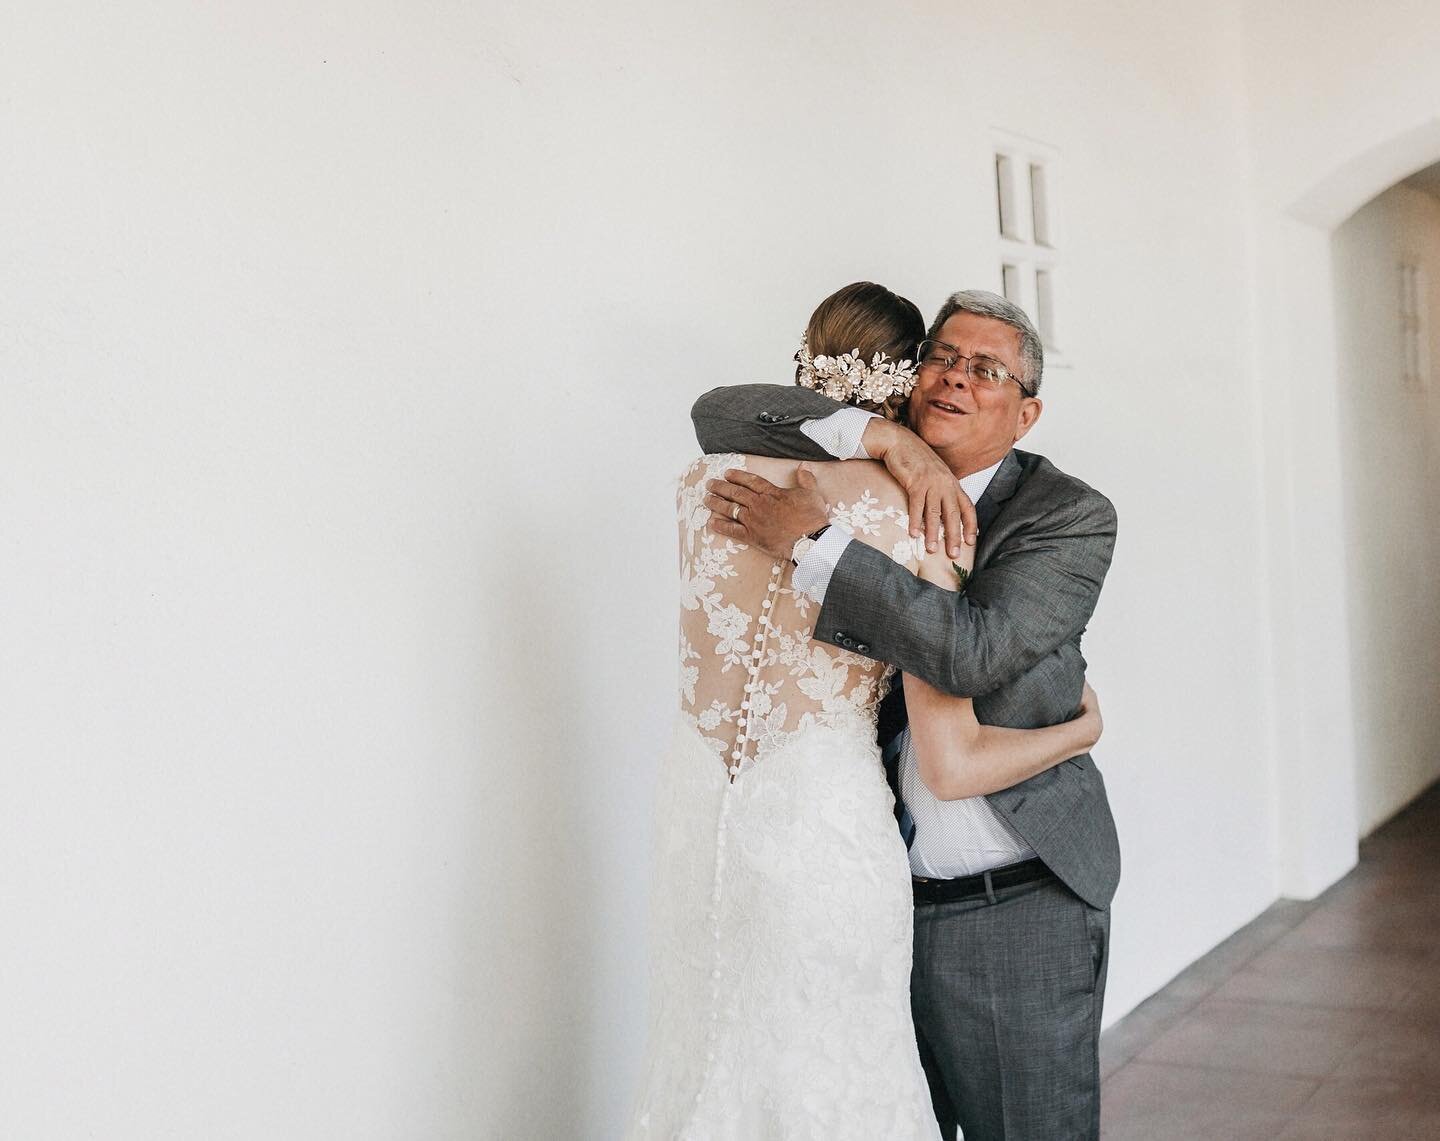 I love the first look between a bride and her dad. You get the most adorable reaction that just make you feel warm and fuzzy.